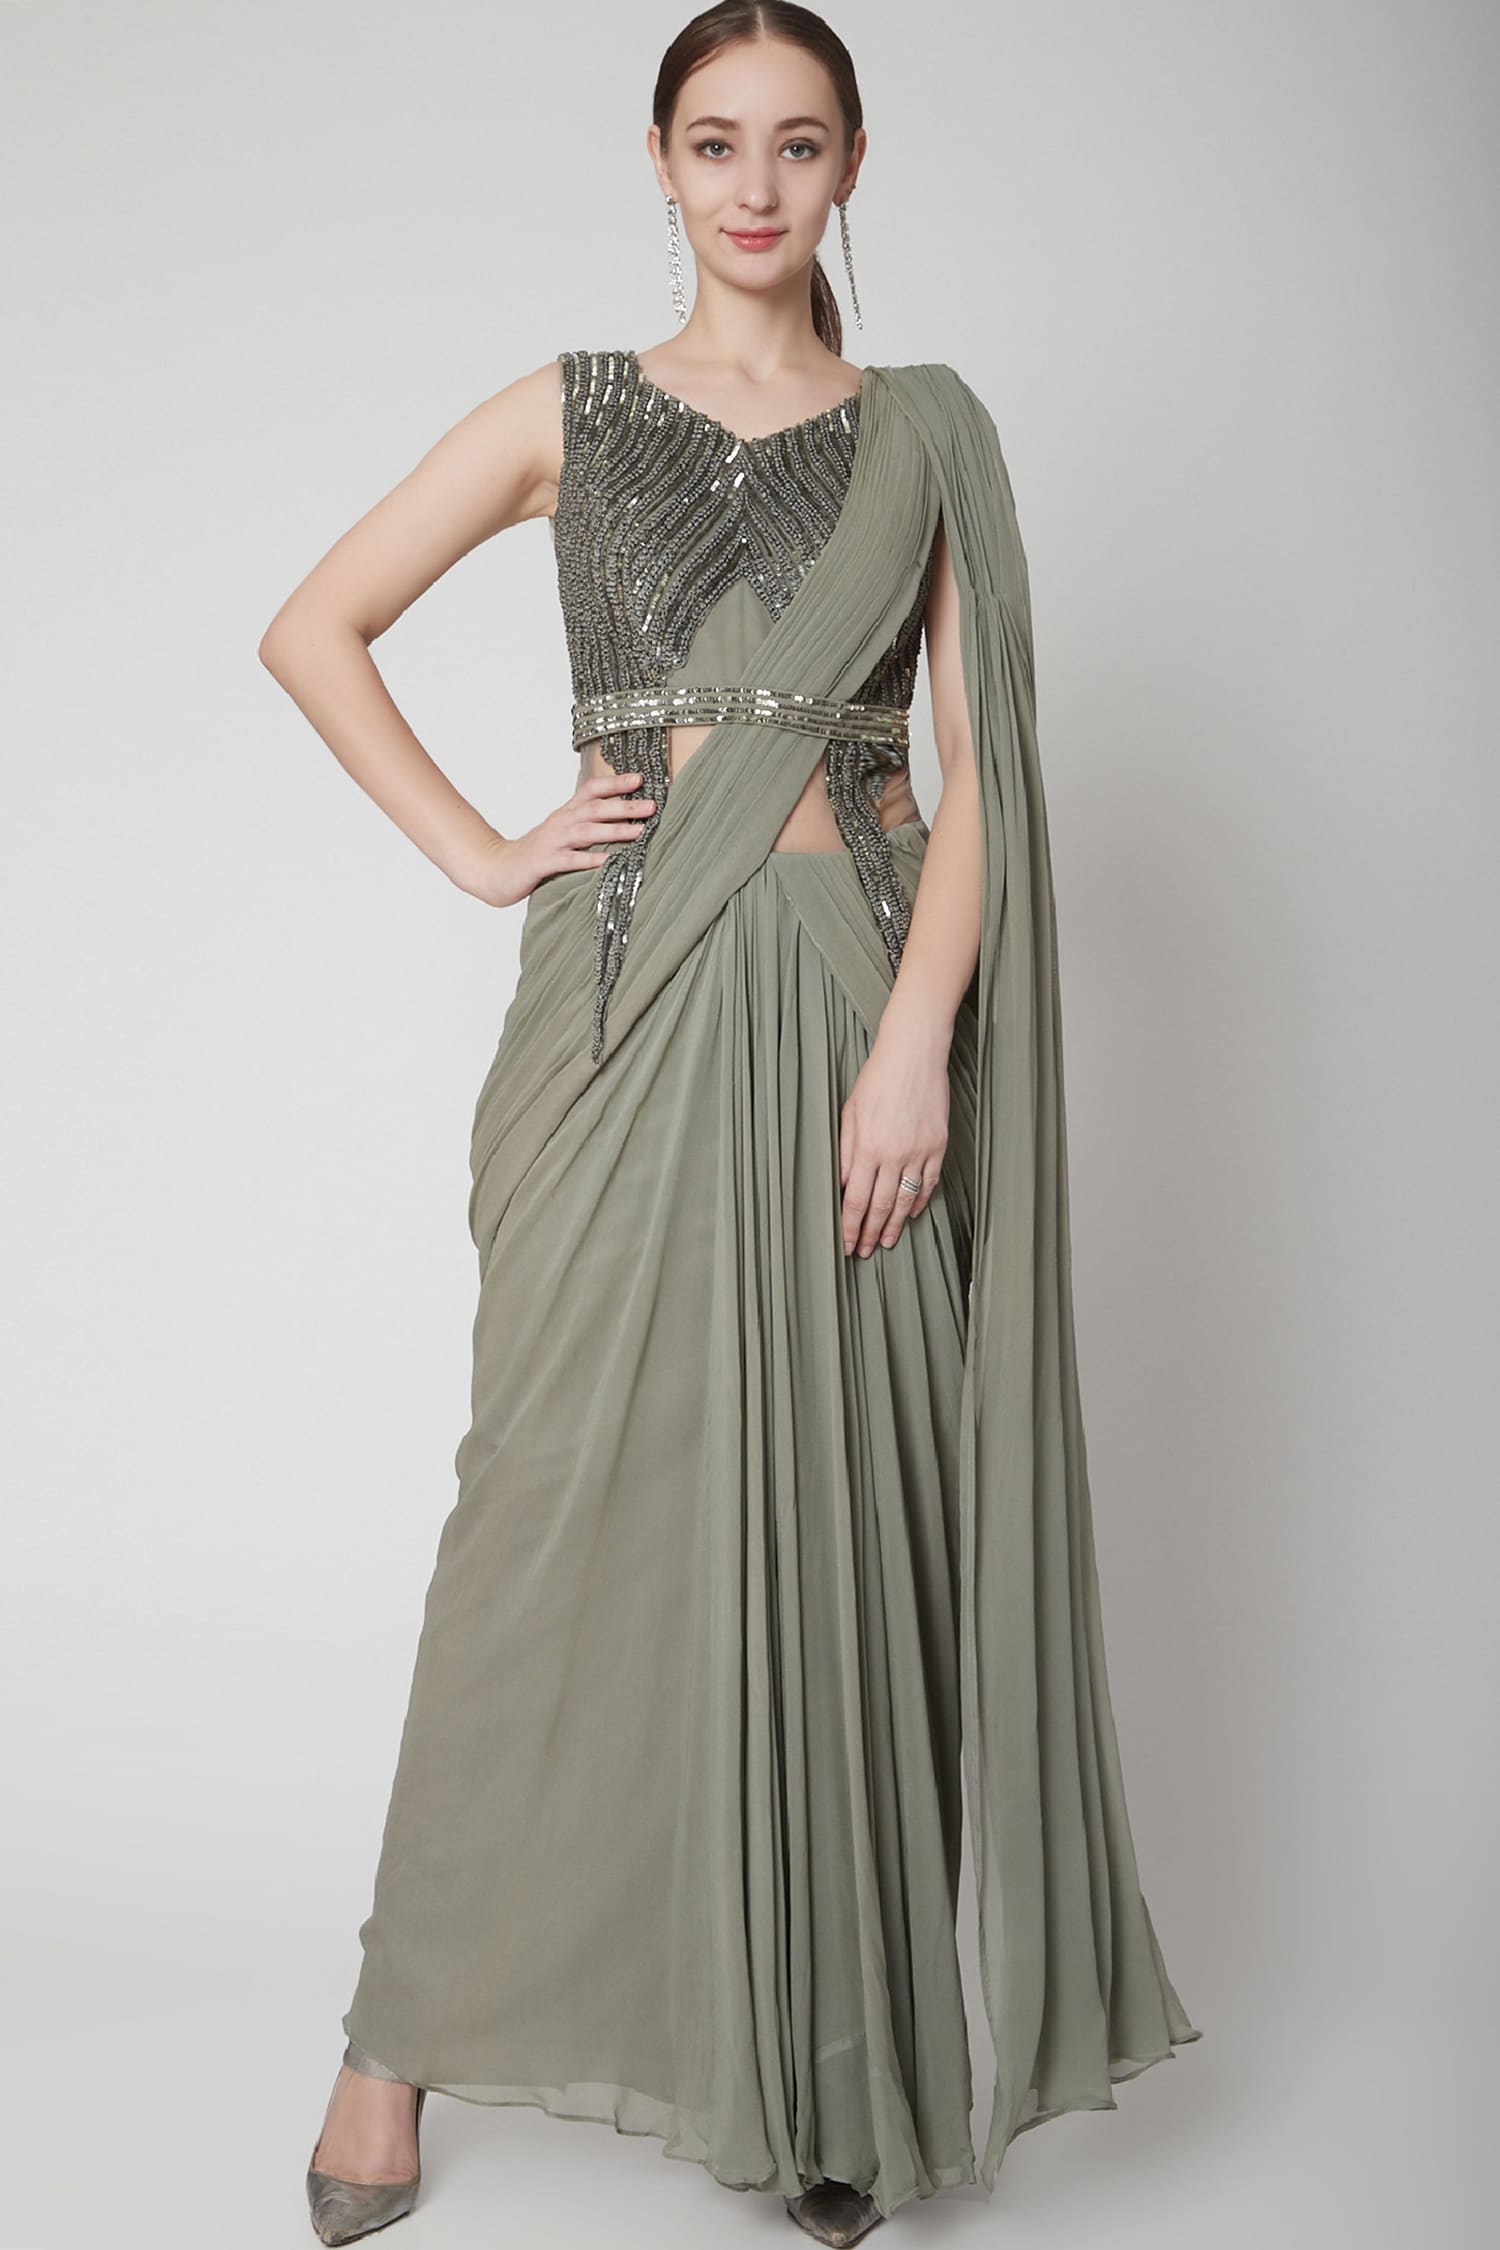 Three saree draping styles for a modern Diwali look